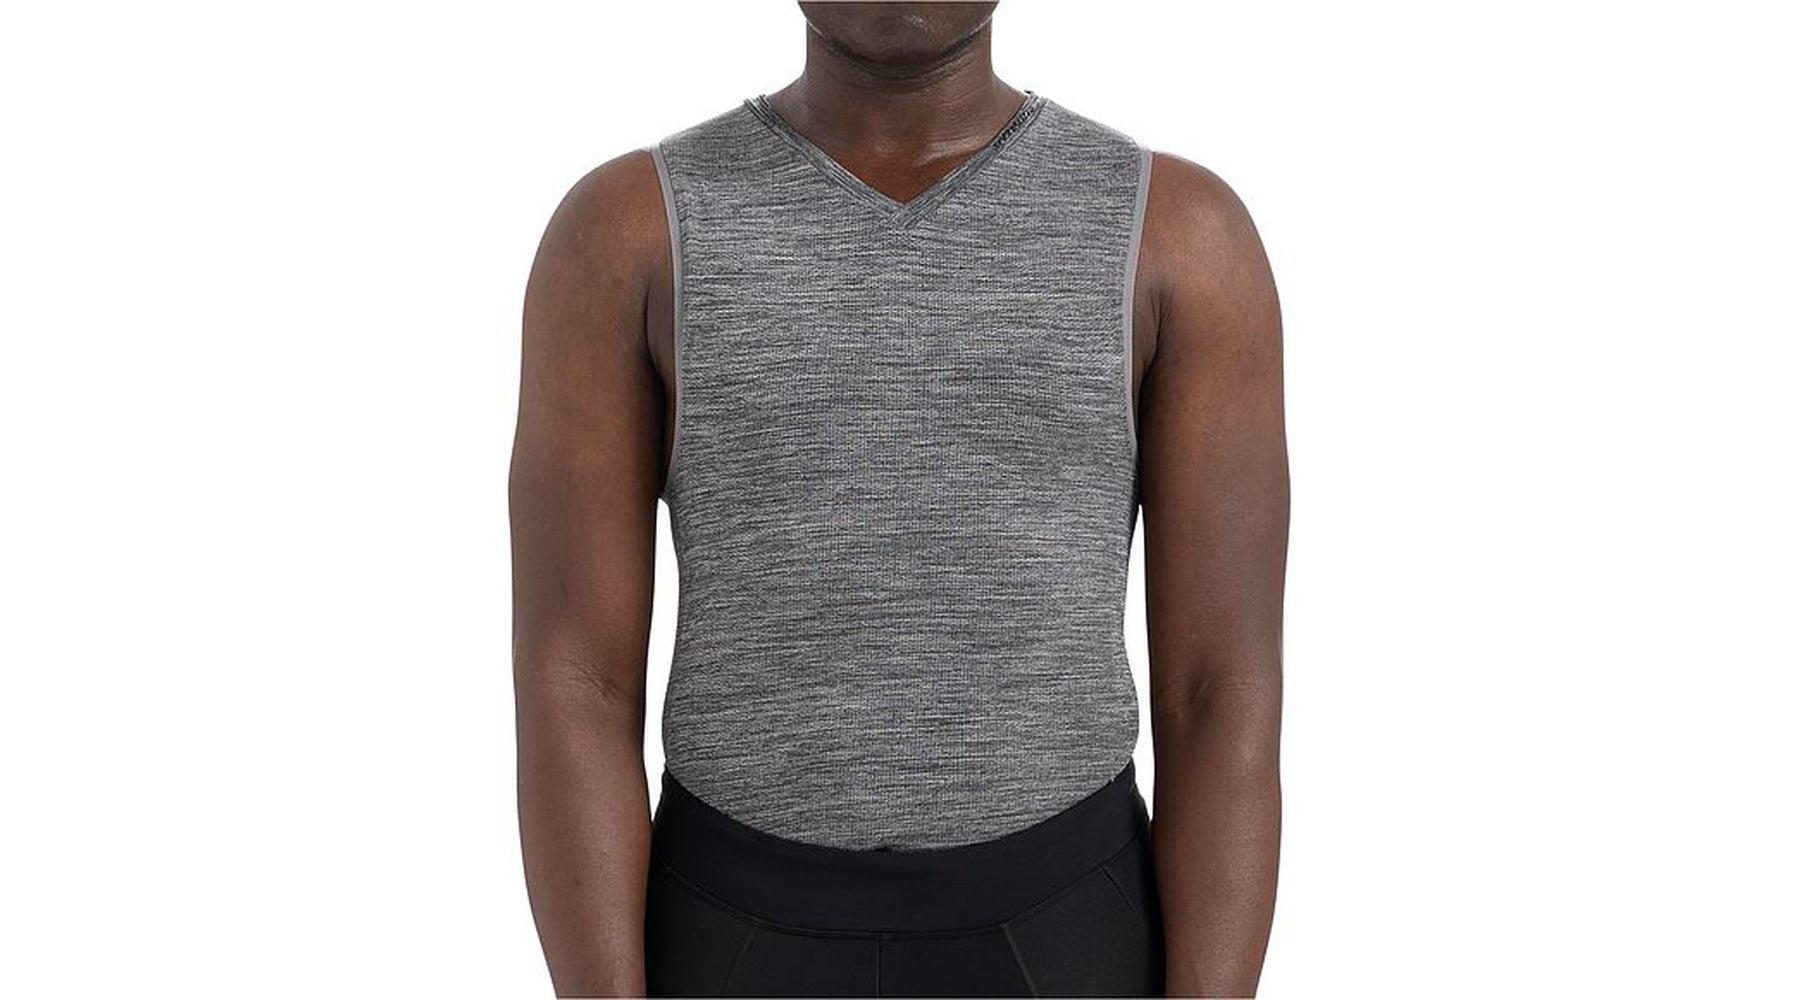 Seamless Sleevless Base Layer | completecyclist - For technical clothing designed to be next to skin, seamless construction reduces edges and stitches on your body that could be sources of irritation and